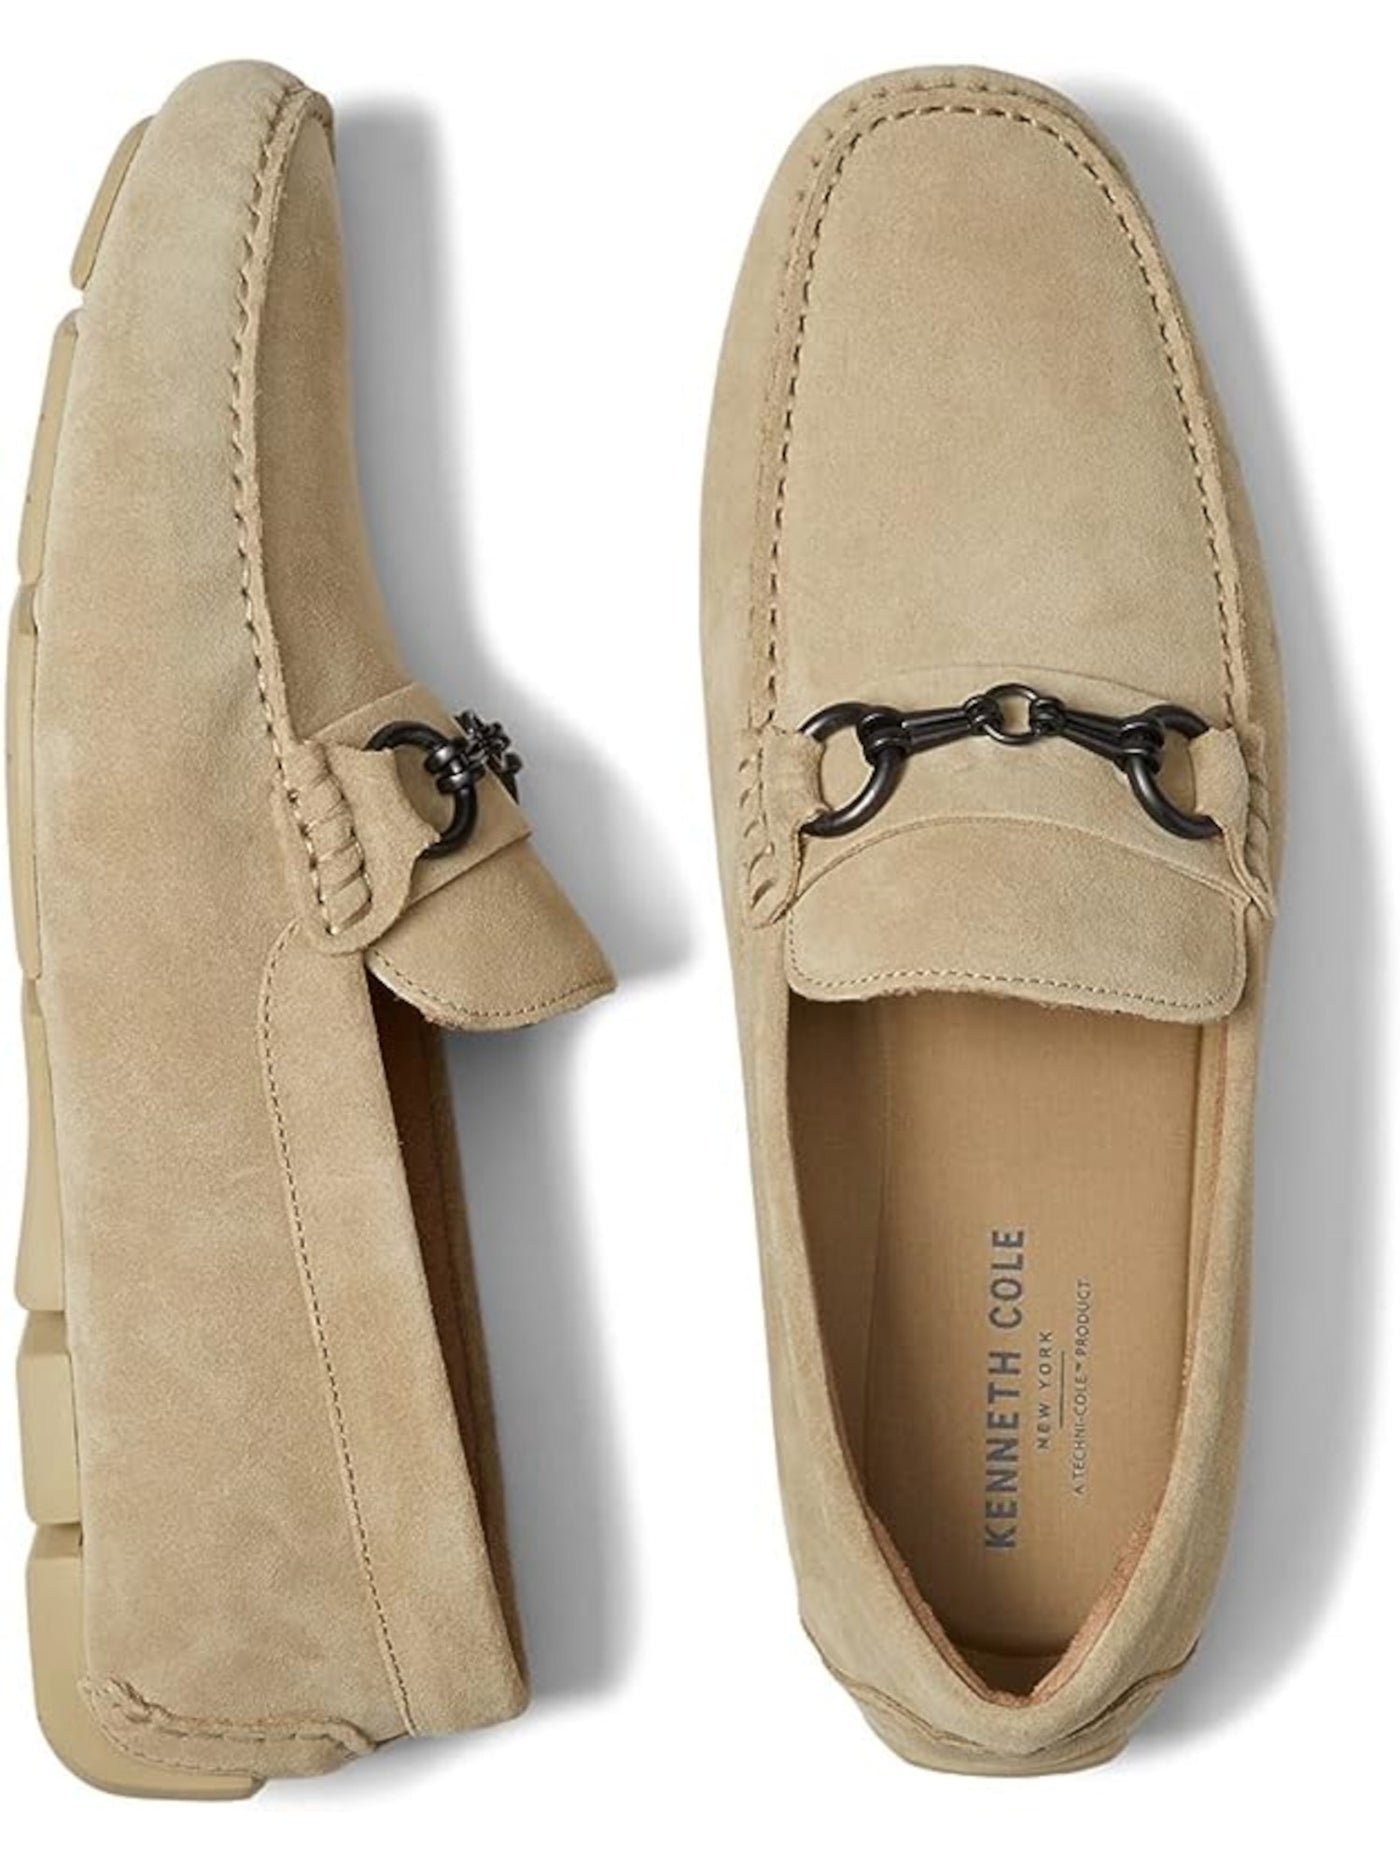 KENNETH COLE NEW YORK Mens Beige Bit Detail Hardware Topstitch Cushioned Removable Insole Theme Square Toe Slip On Leather Loafers Shoes 8.5